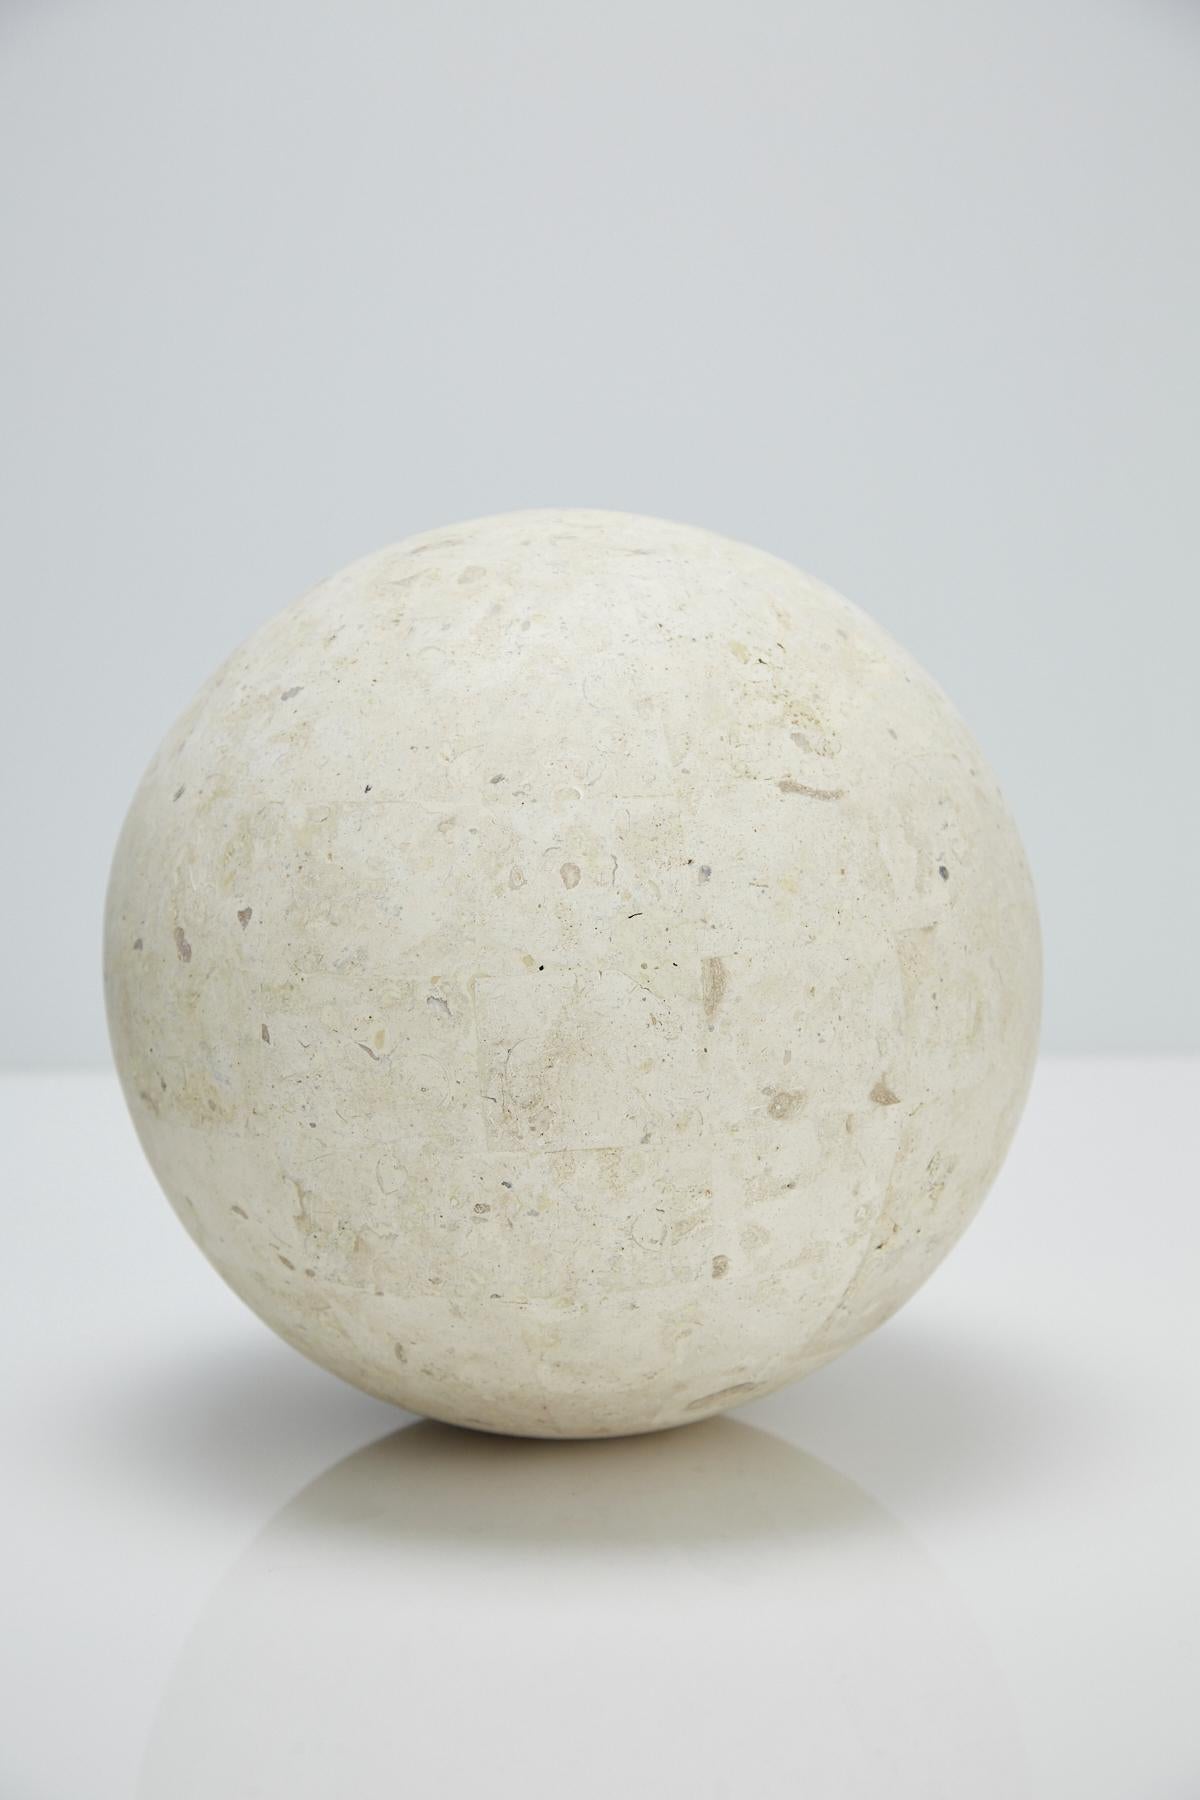 Philippine Large Tessellated Matte Mactan Stone Sphere - 10.5 in. Diameter For Sale